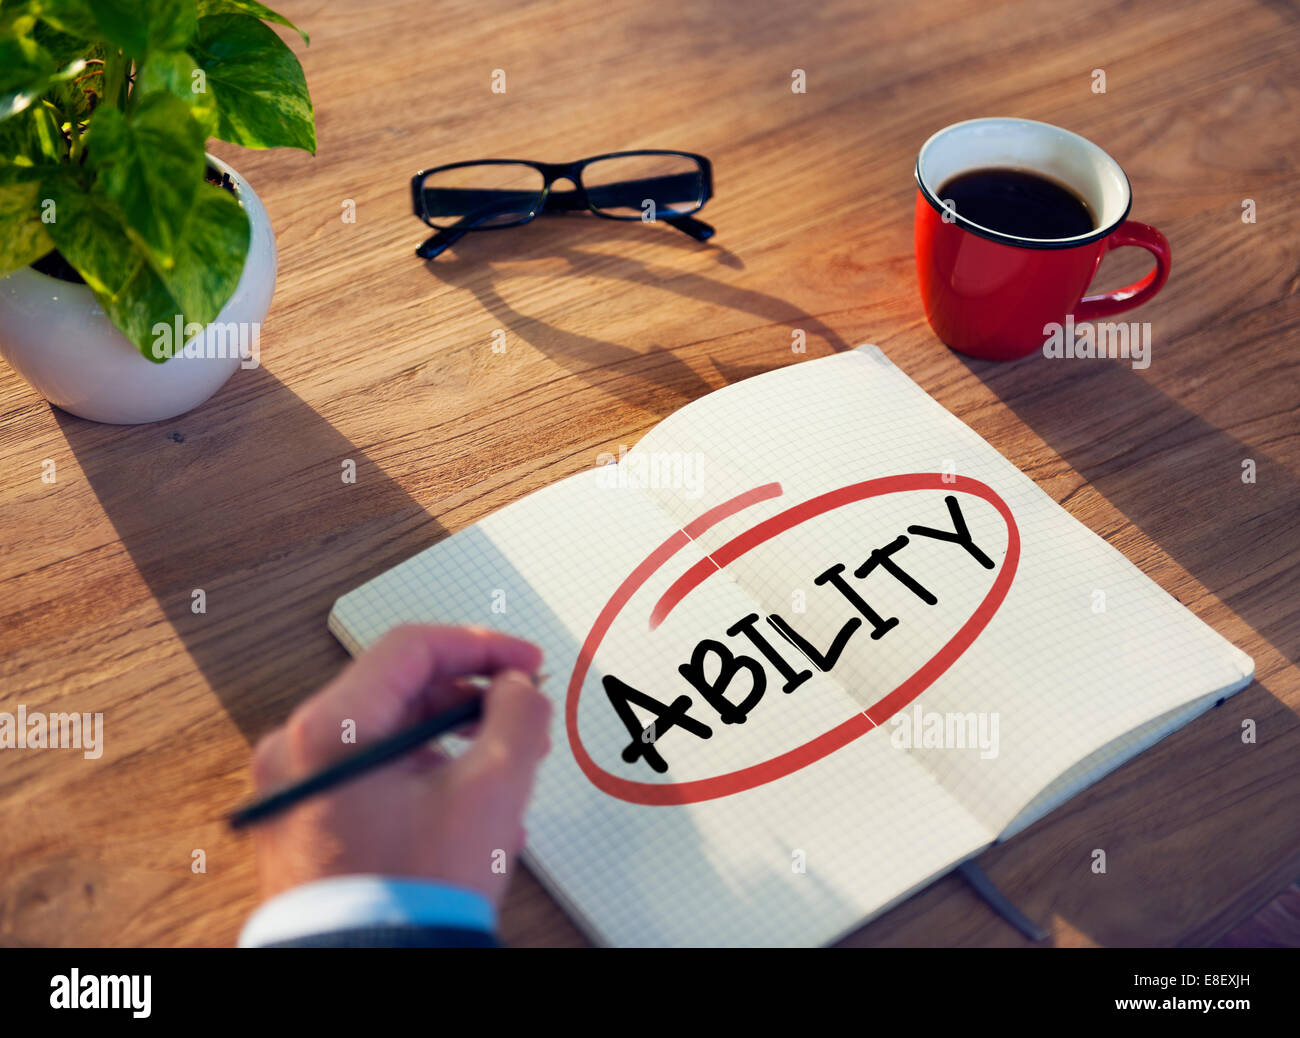 Hand of Businessman Working with Ability Concept Stock Photo